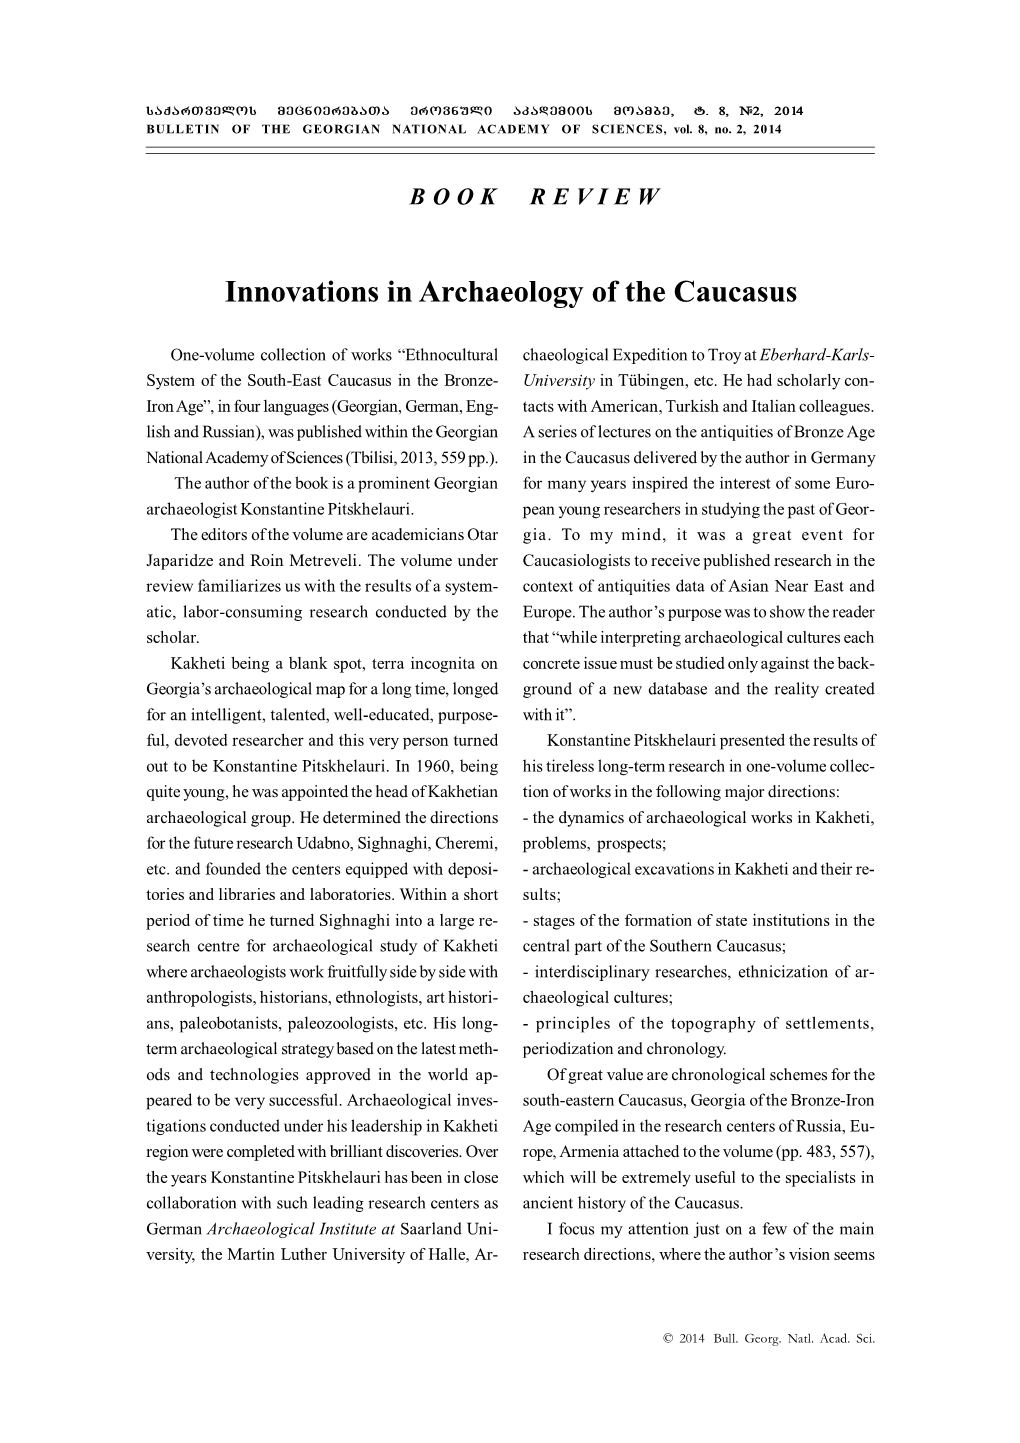 Innovations in Archaeology of the Caucasus